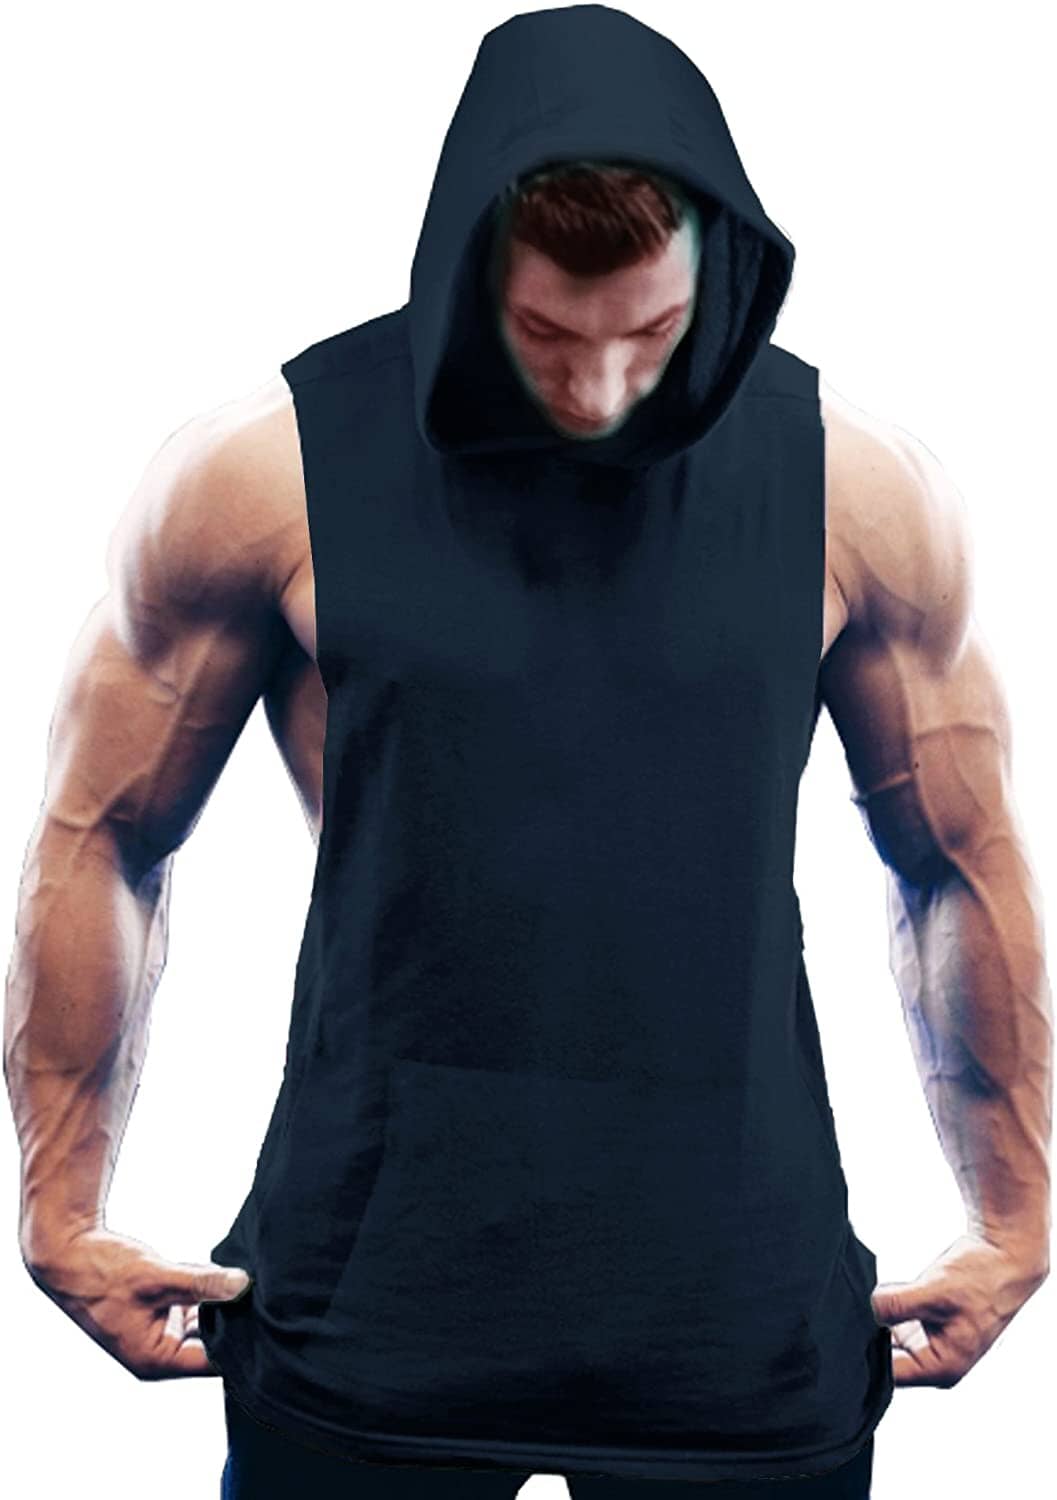 Workout Bodybuilding Muscle Sleeveless Hooded Tank Top (US Only) Tank Tops COOFANDY Store Dark Grey Blue S 